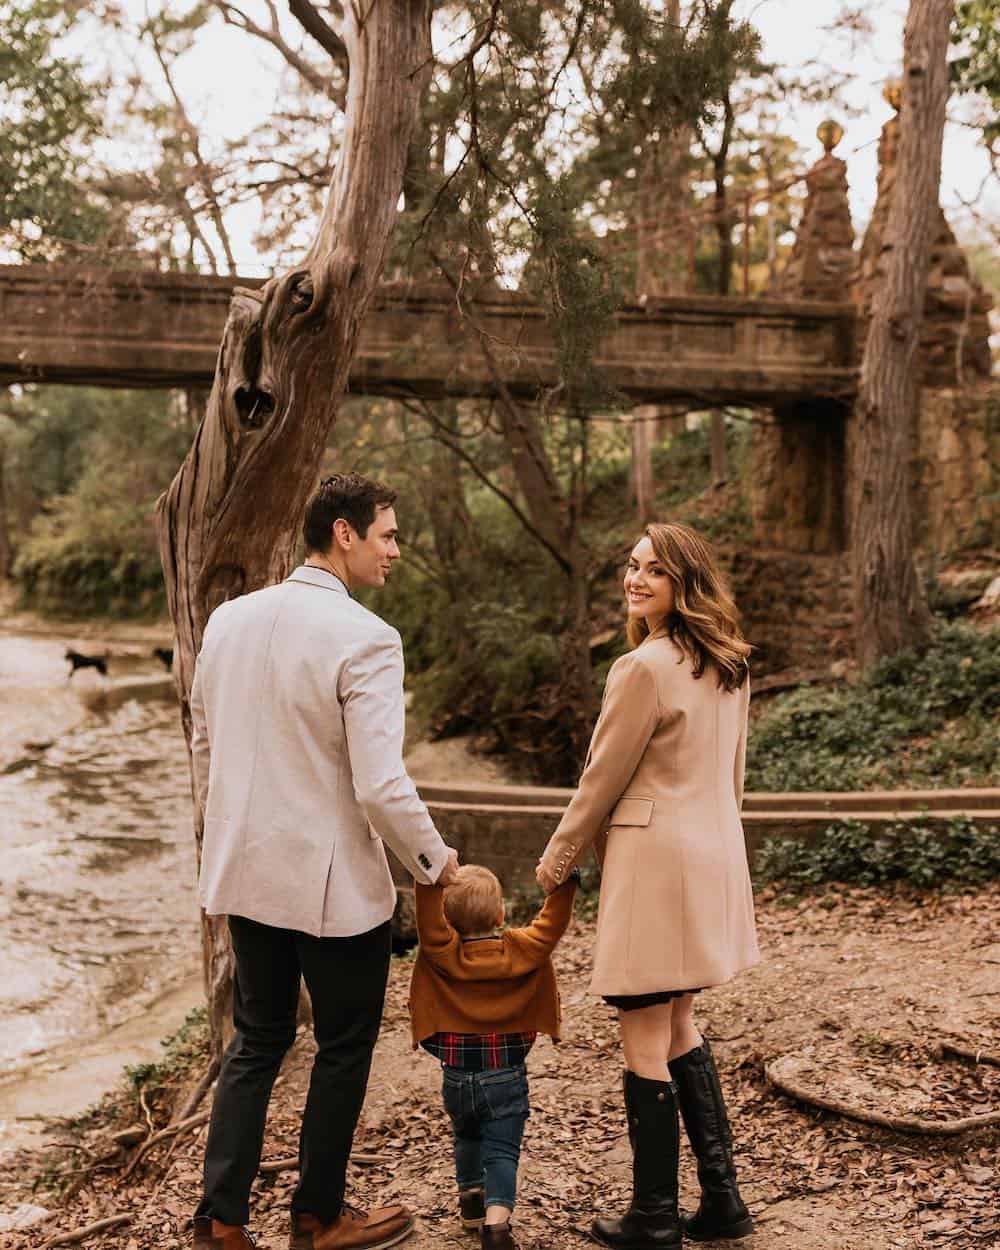 image of a family having an outdoor fall photoshoot with a mom, dad, and small boy, all wearing neutral colors